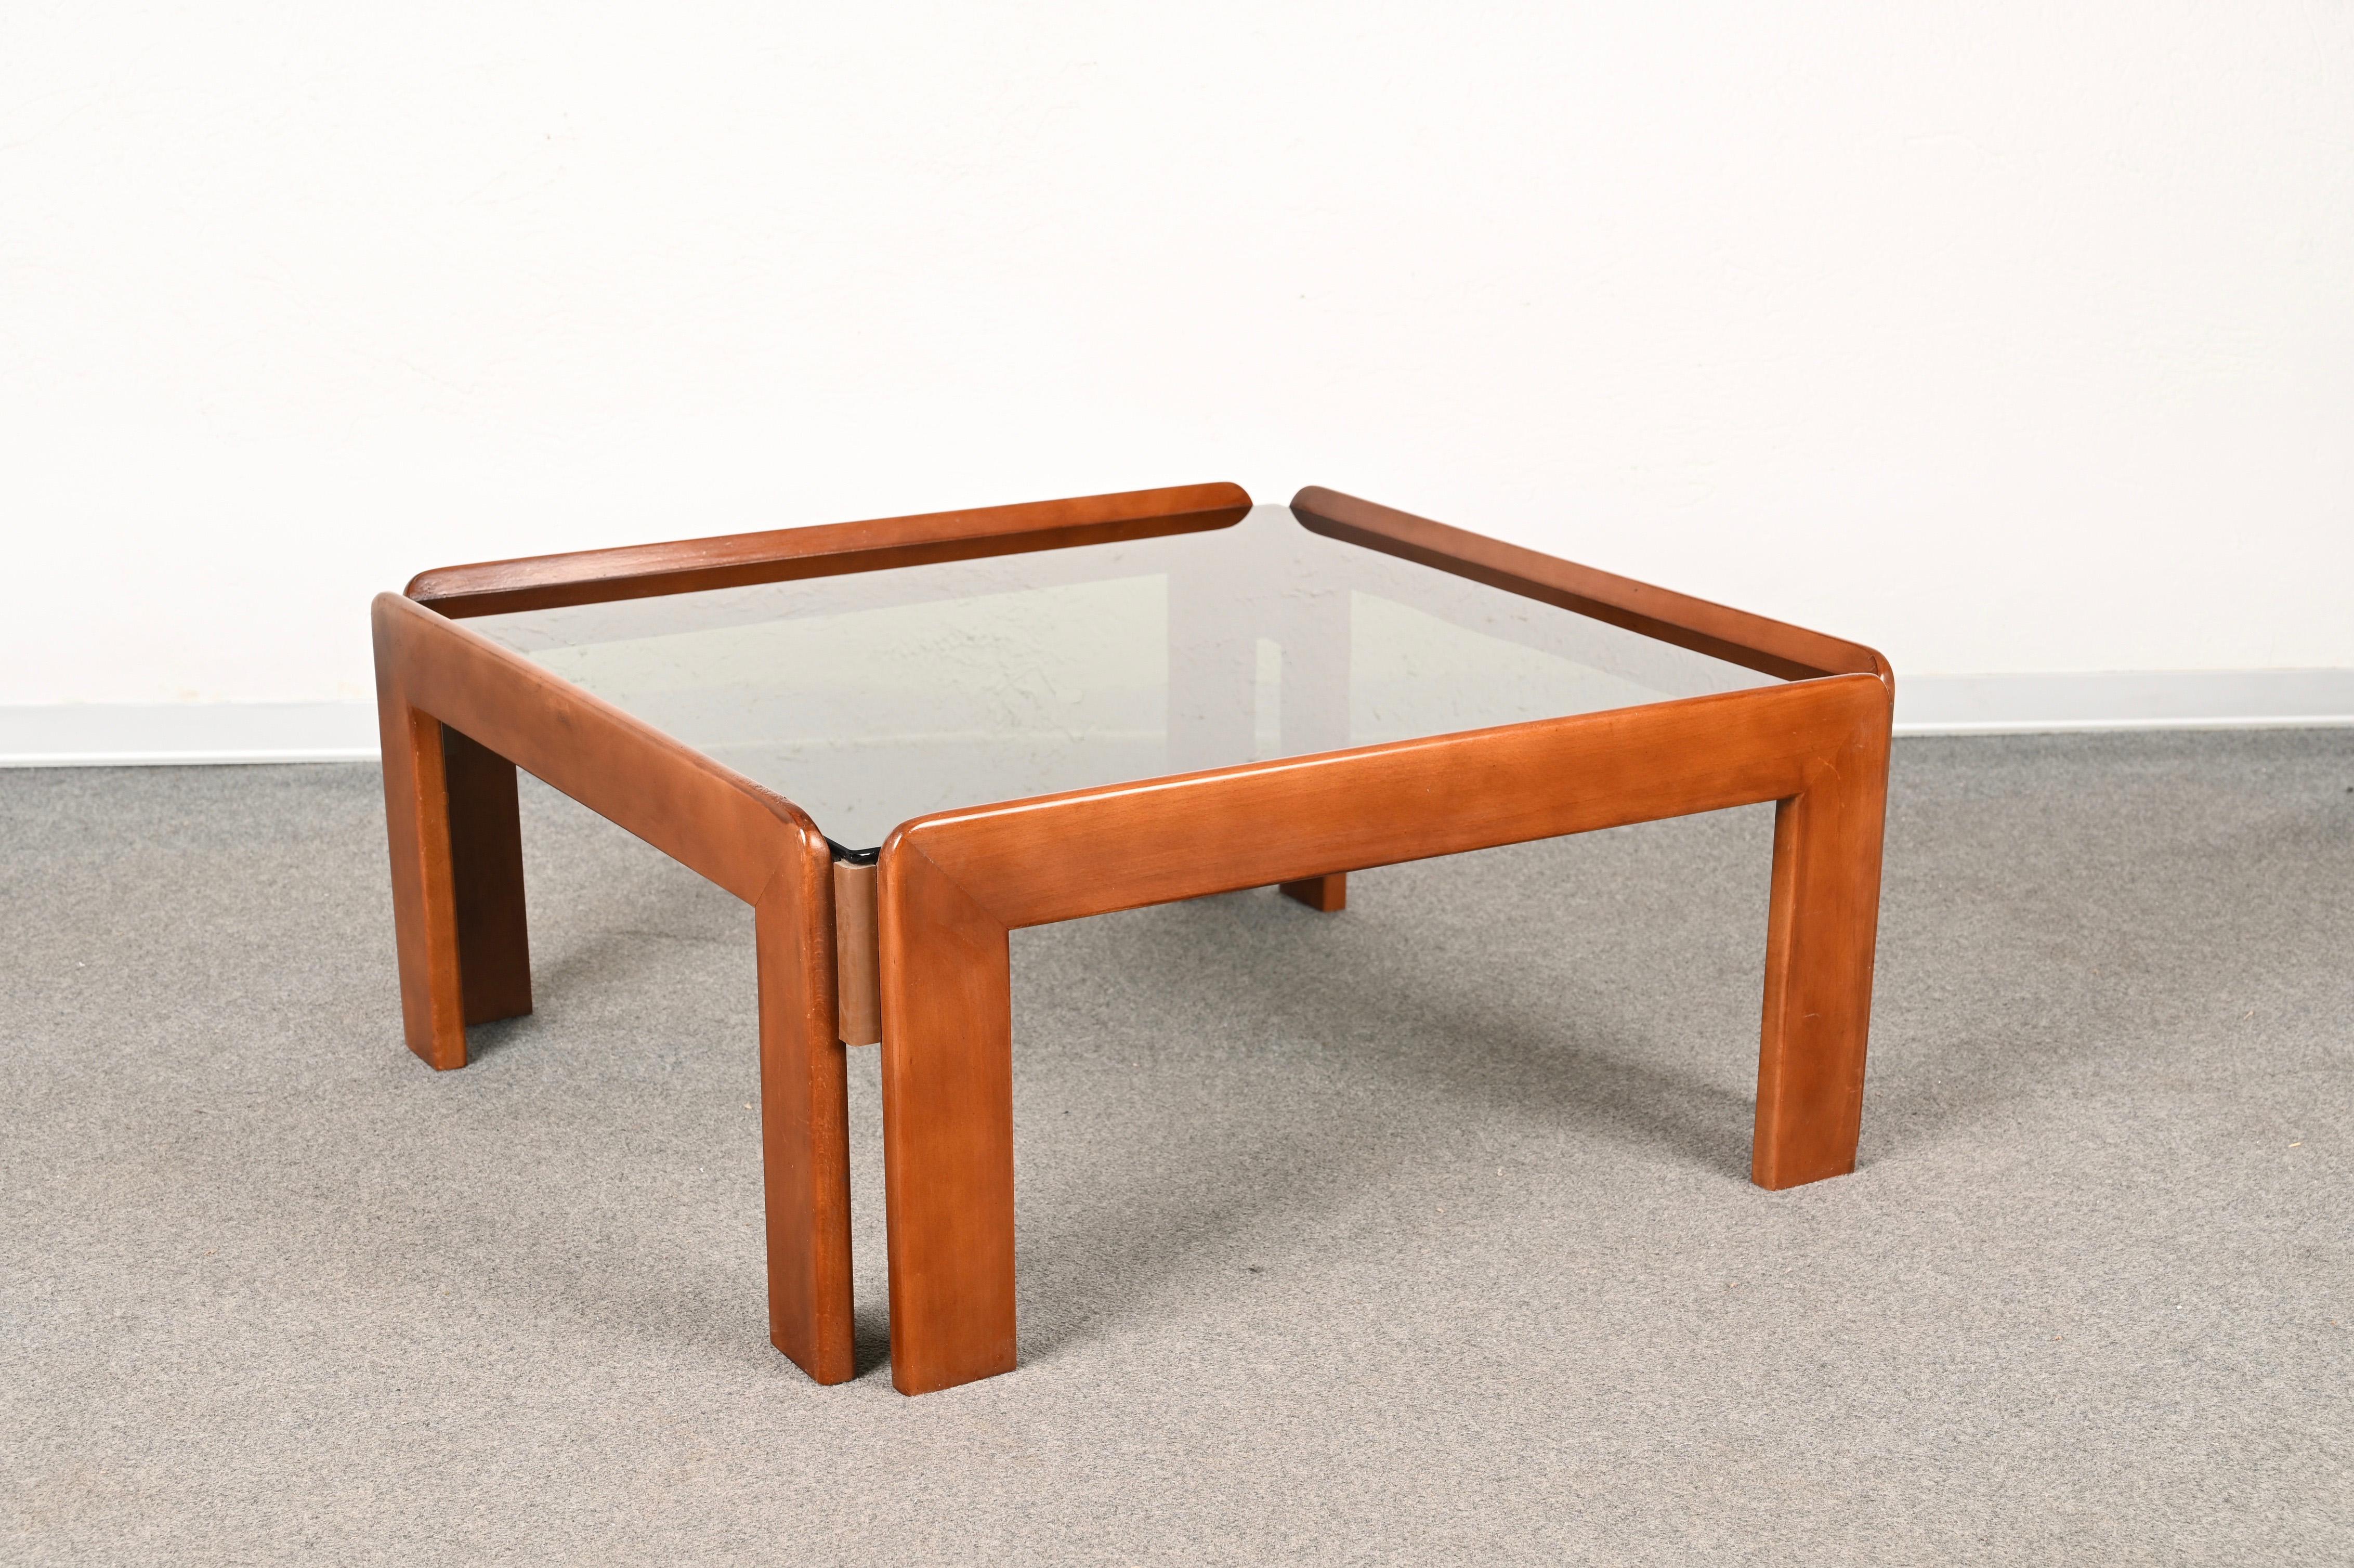 Afra & Tobia Scarpa Midcentury Wood Squared Italian Coffee Table, 1960s For Sale 8